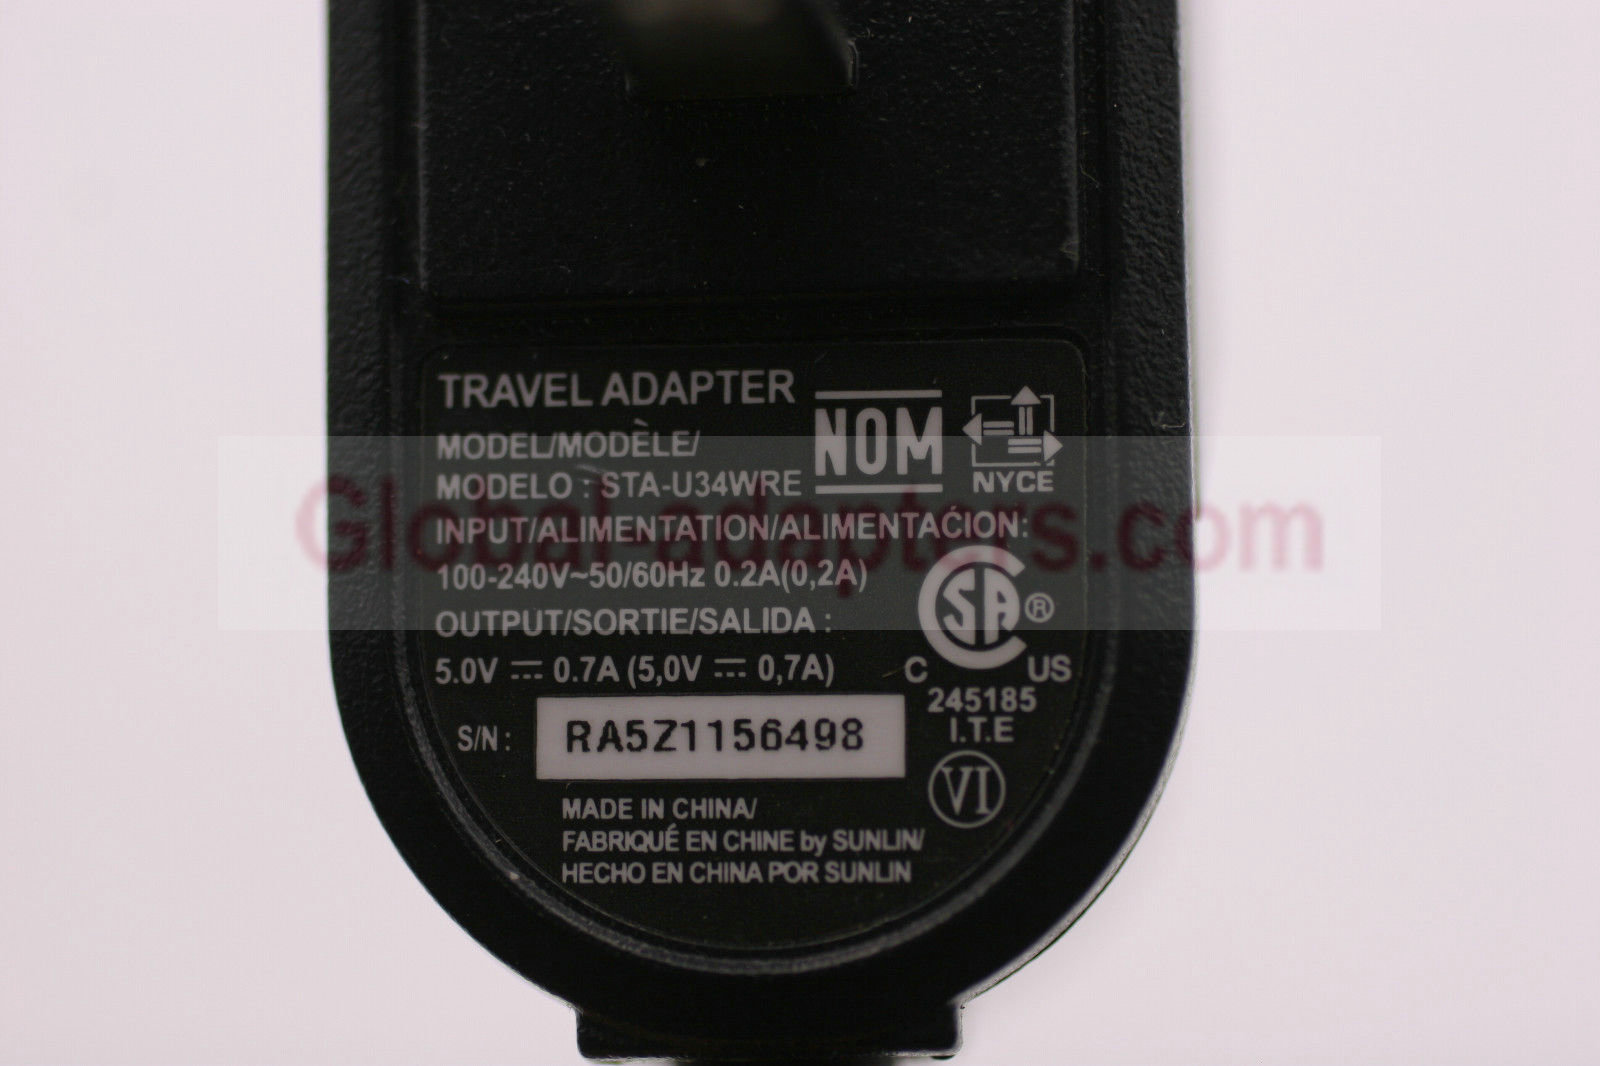 NEW 5V 0.7A LG STA-U34WRE Micro USB AC Travel Wall Charger Adapter